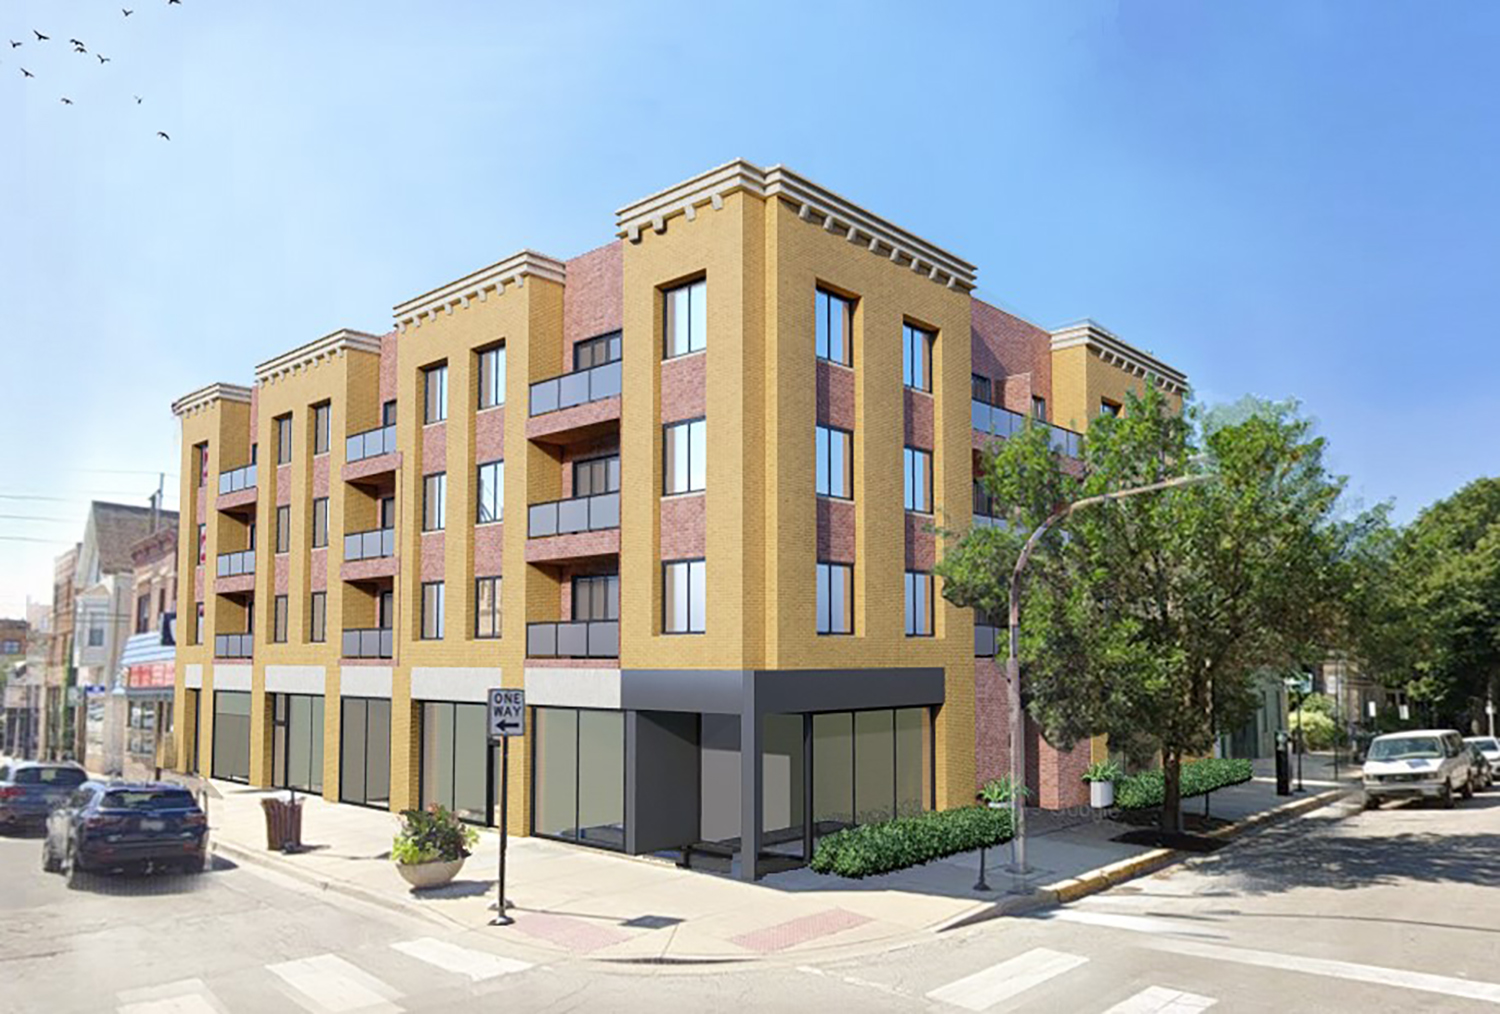 1138 W Belmont Avenue. Rendering by Red Architects